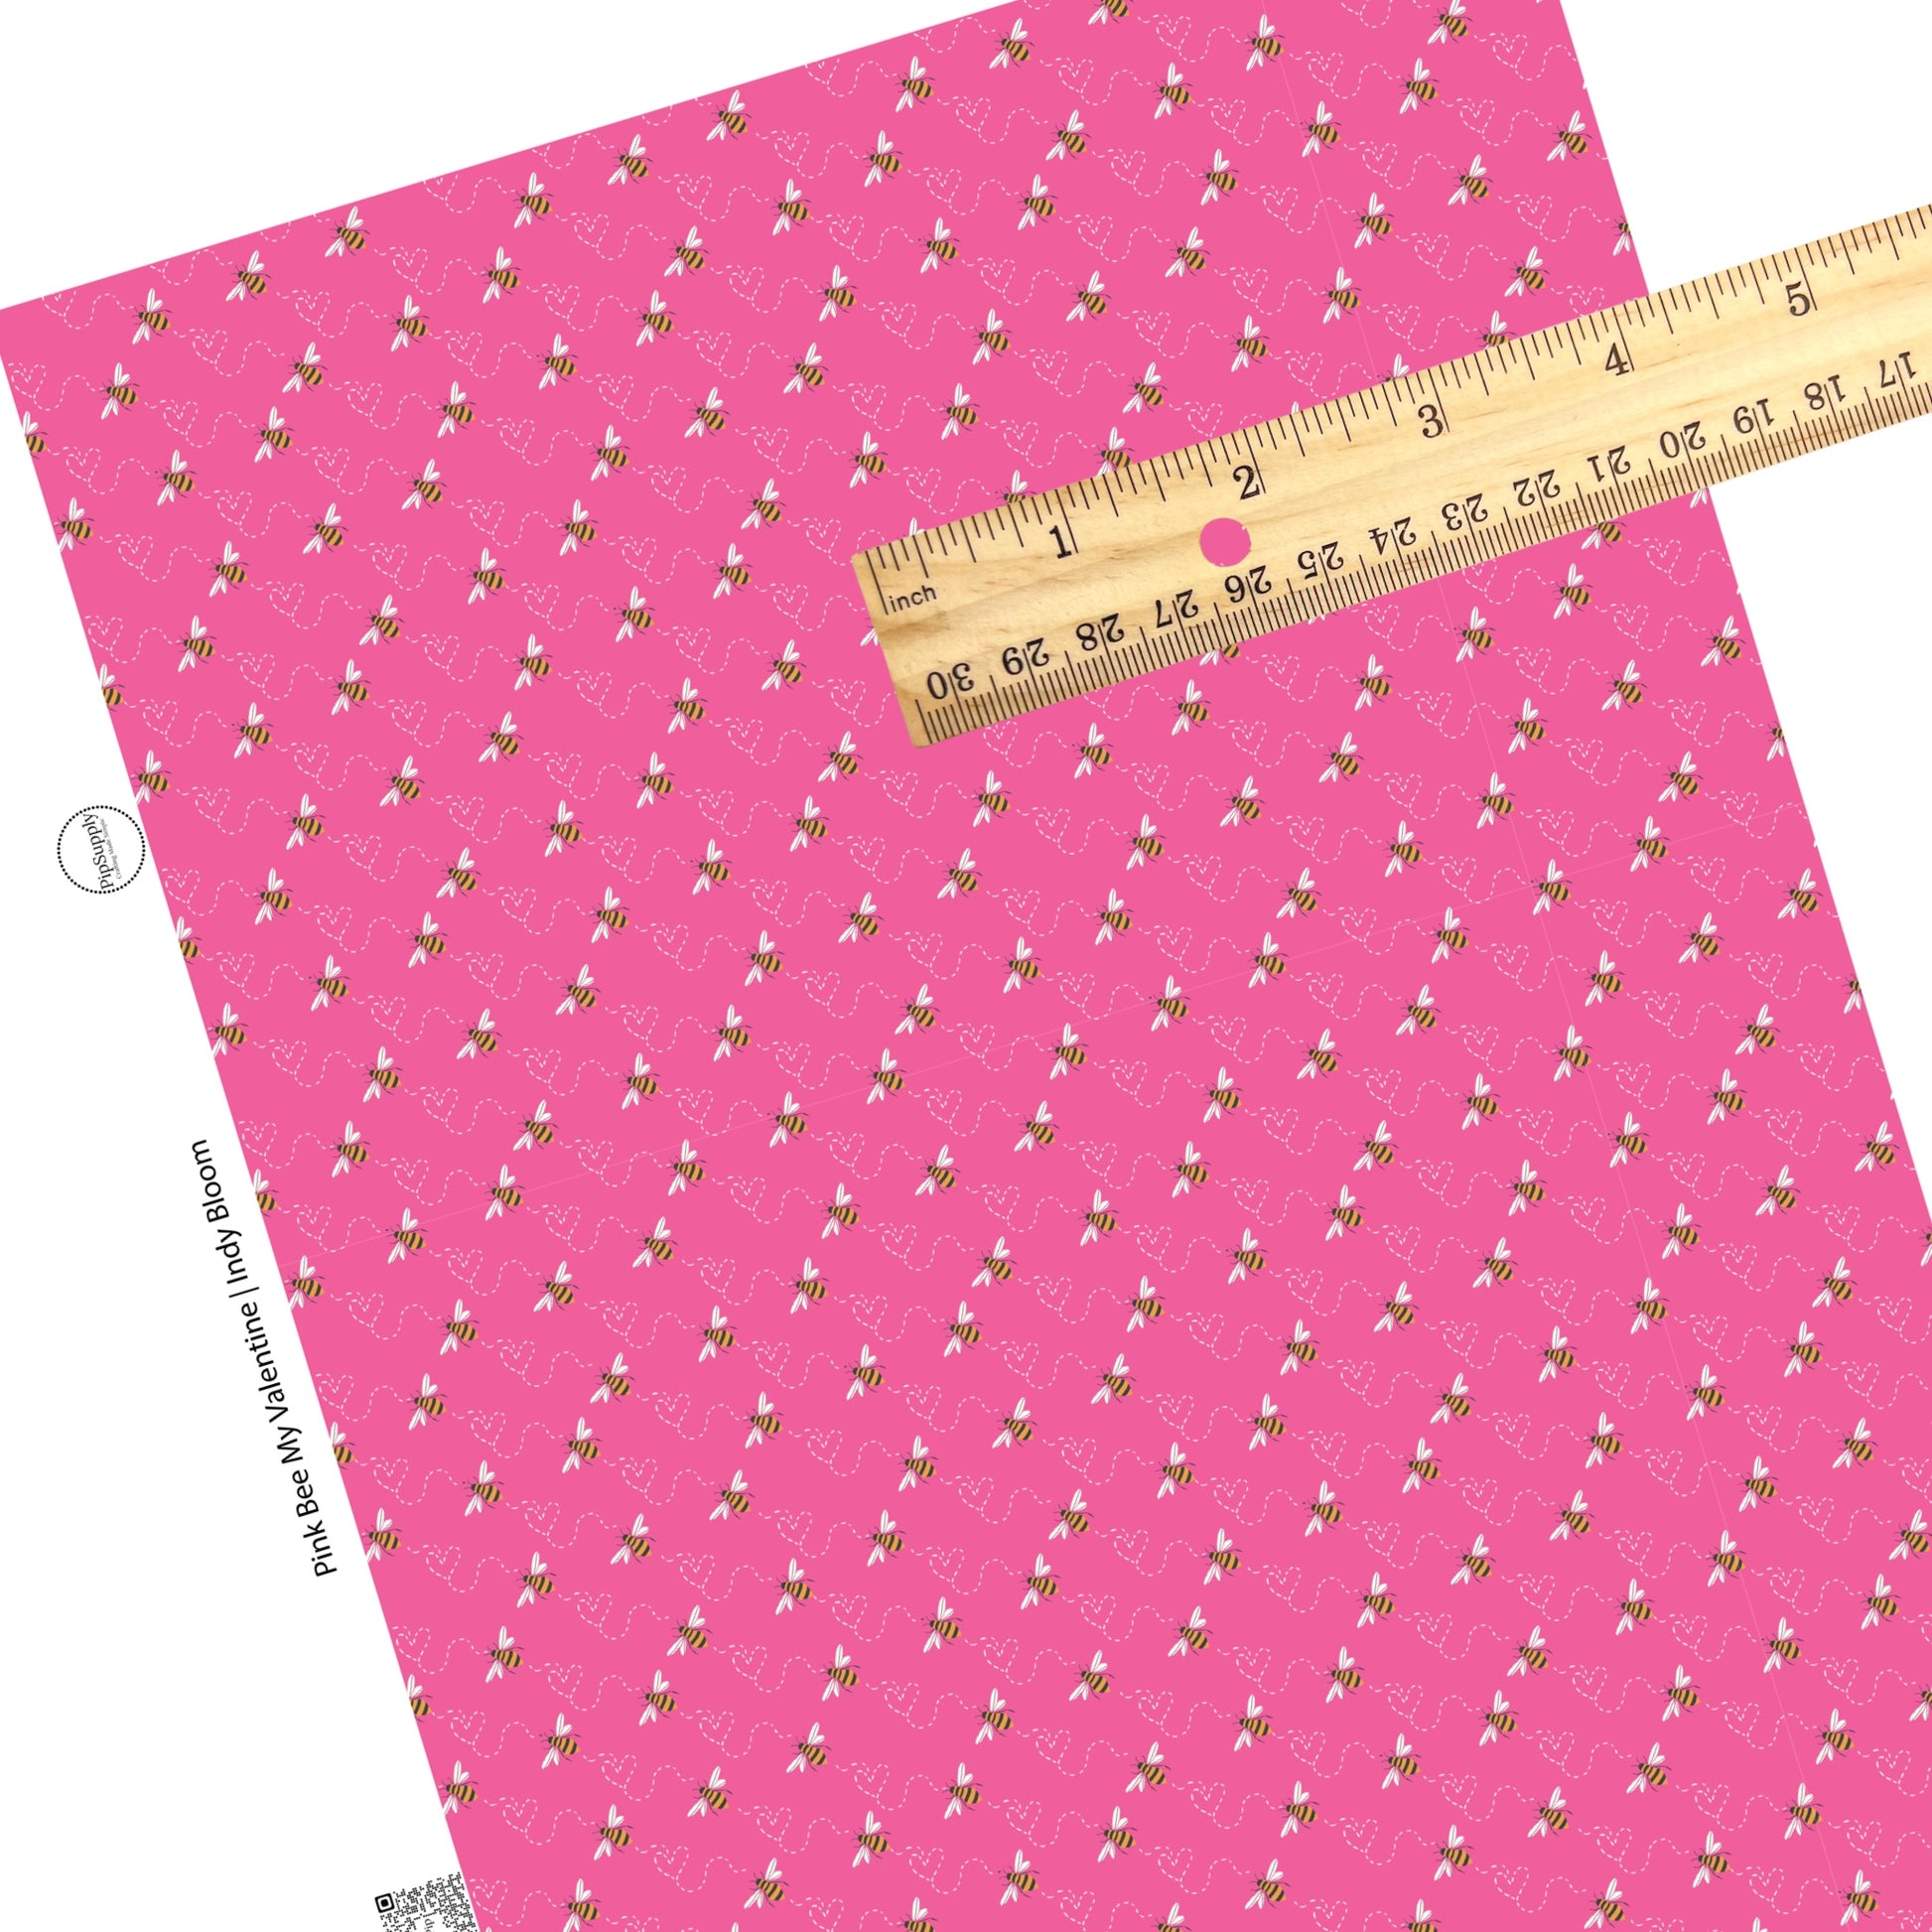 These Valentine's pattern themed faux leather sheets contain the following design elements: small bees and white hearts on pink. Our CPSIA compliant faux leather sheets or rolls can be used for all types of crafting projects.